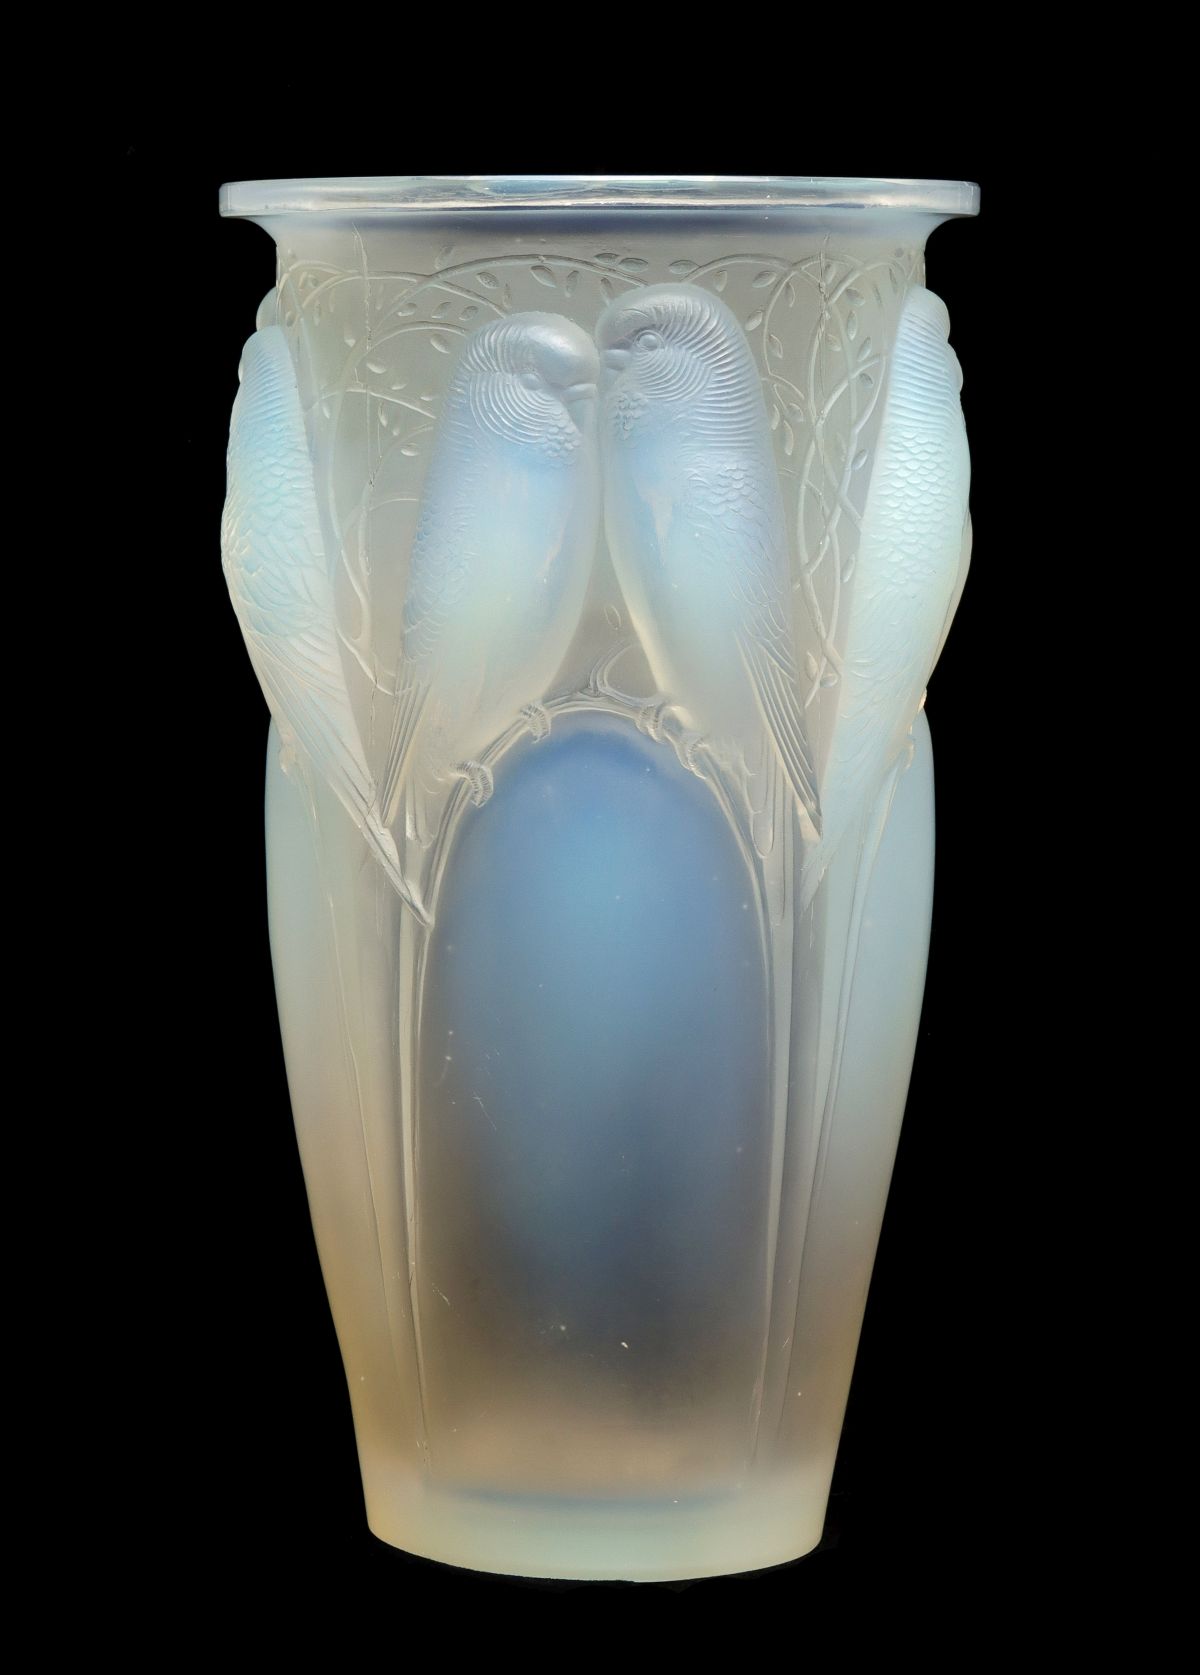 A FRENCH OPALESCENT ART GLASS VASE SIGNED R. LALIQUE